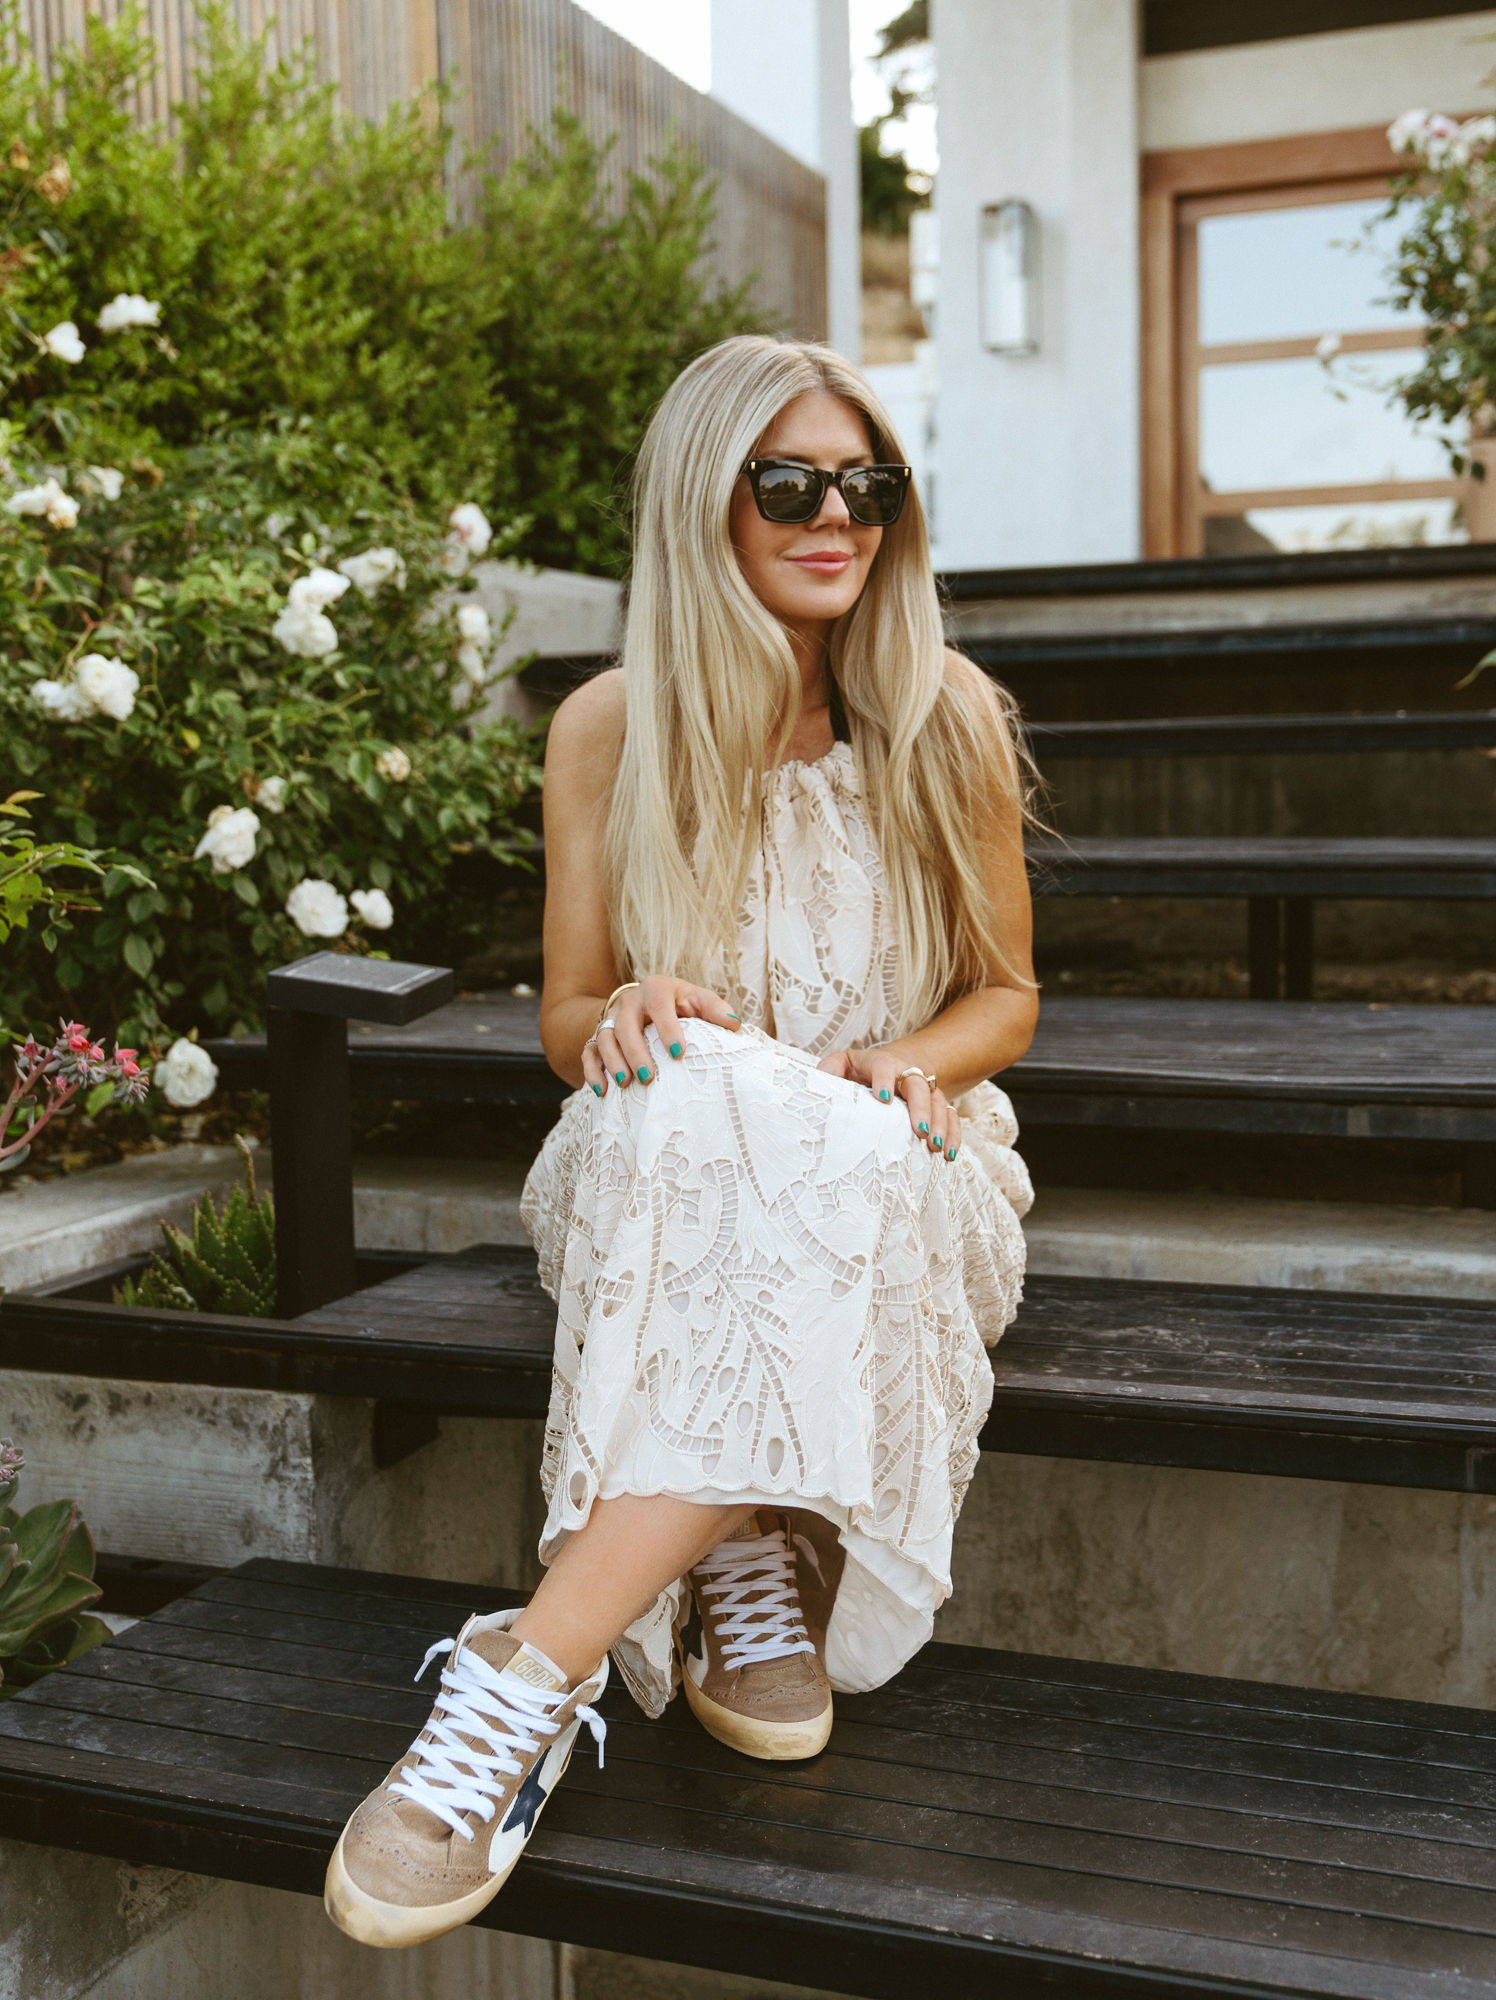 Lisa Allen Salty Lashes blogger sitting on the stairs and wearing a lace dress from the Nordstrom Summer Styles